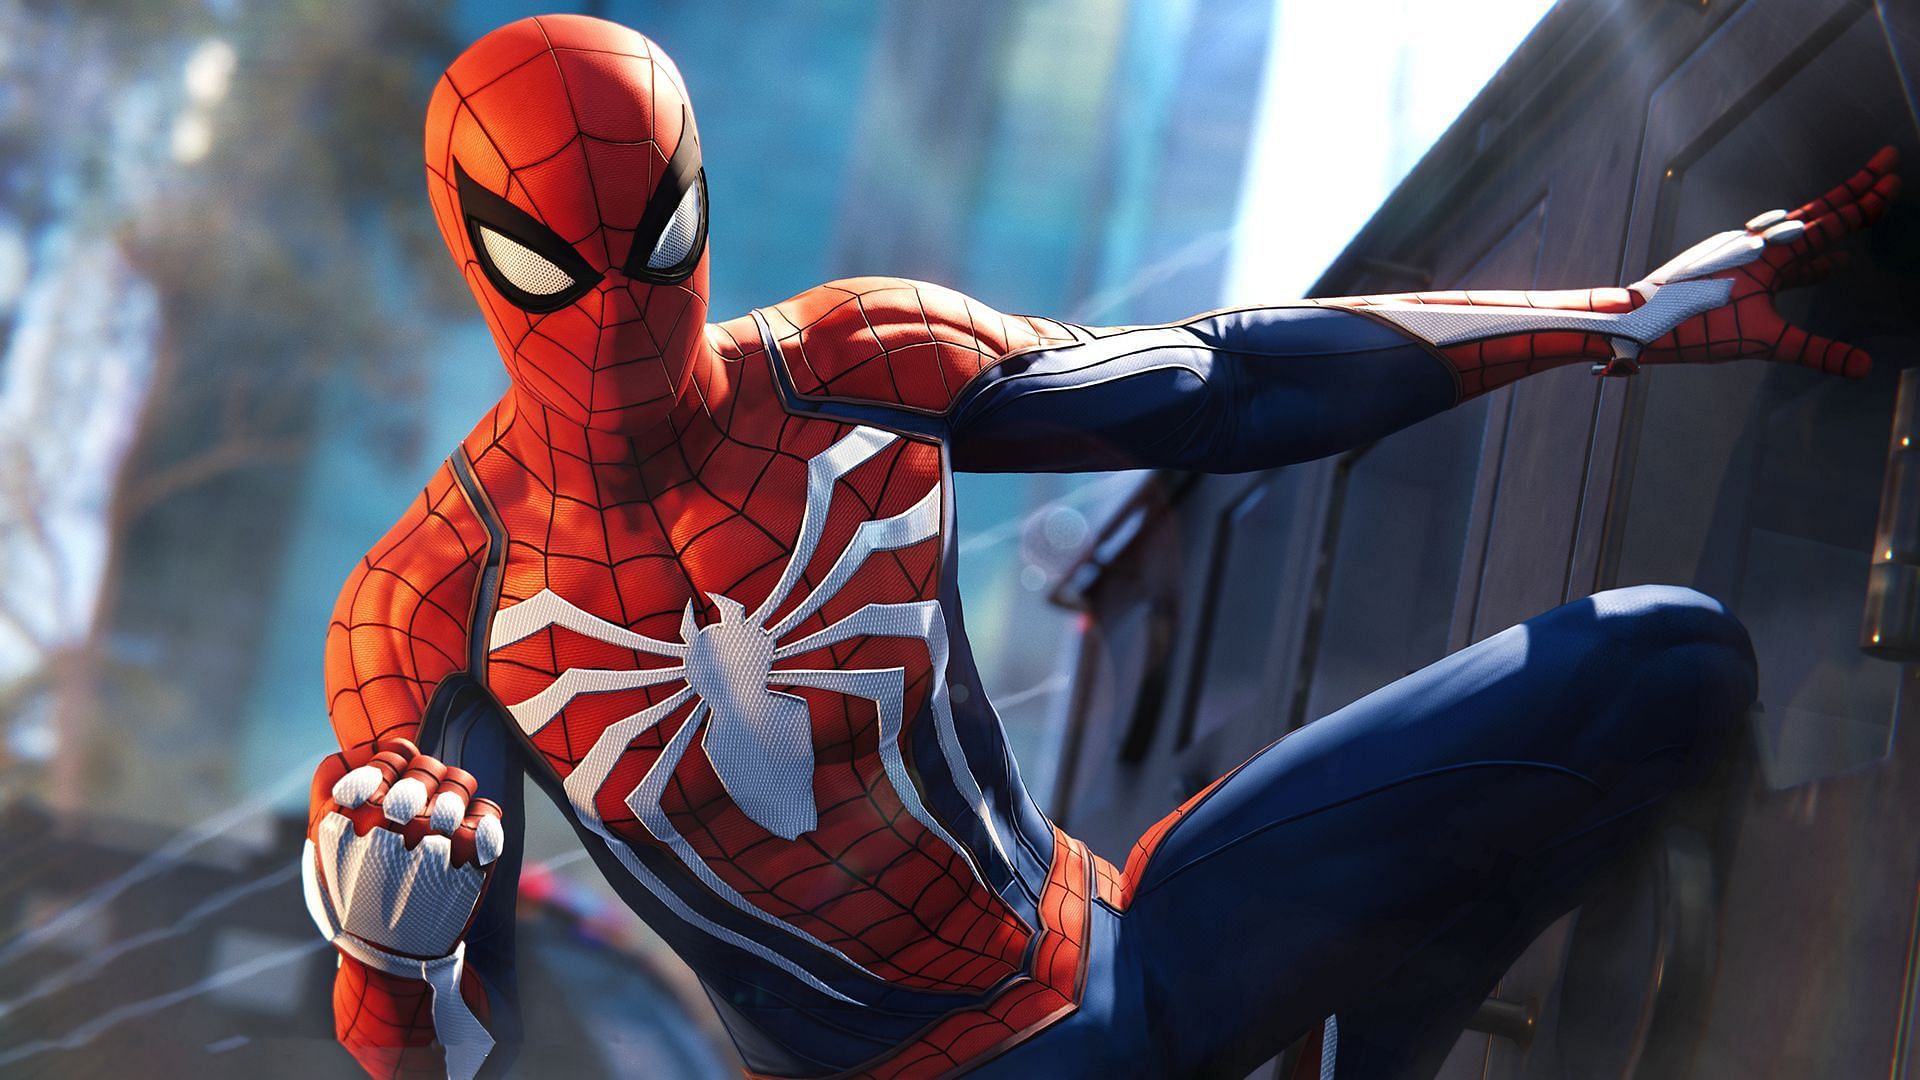 With great power comes great responsibility (Images via Insomniac Games)